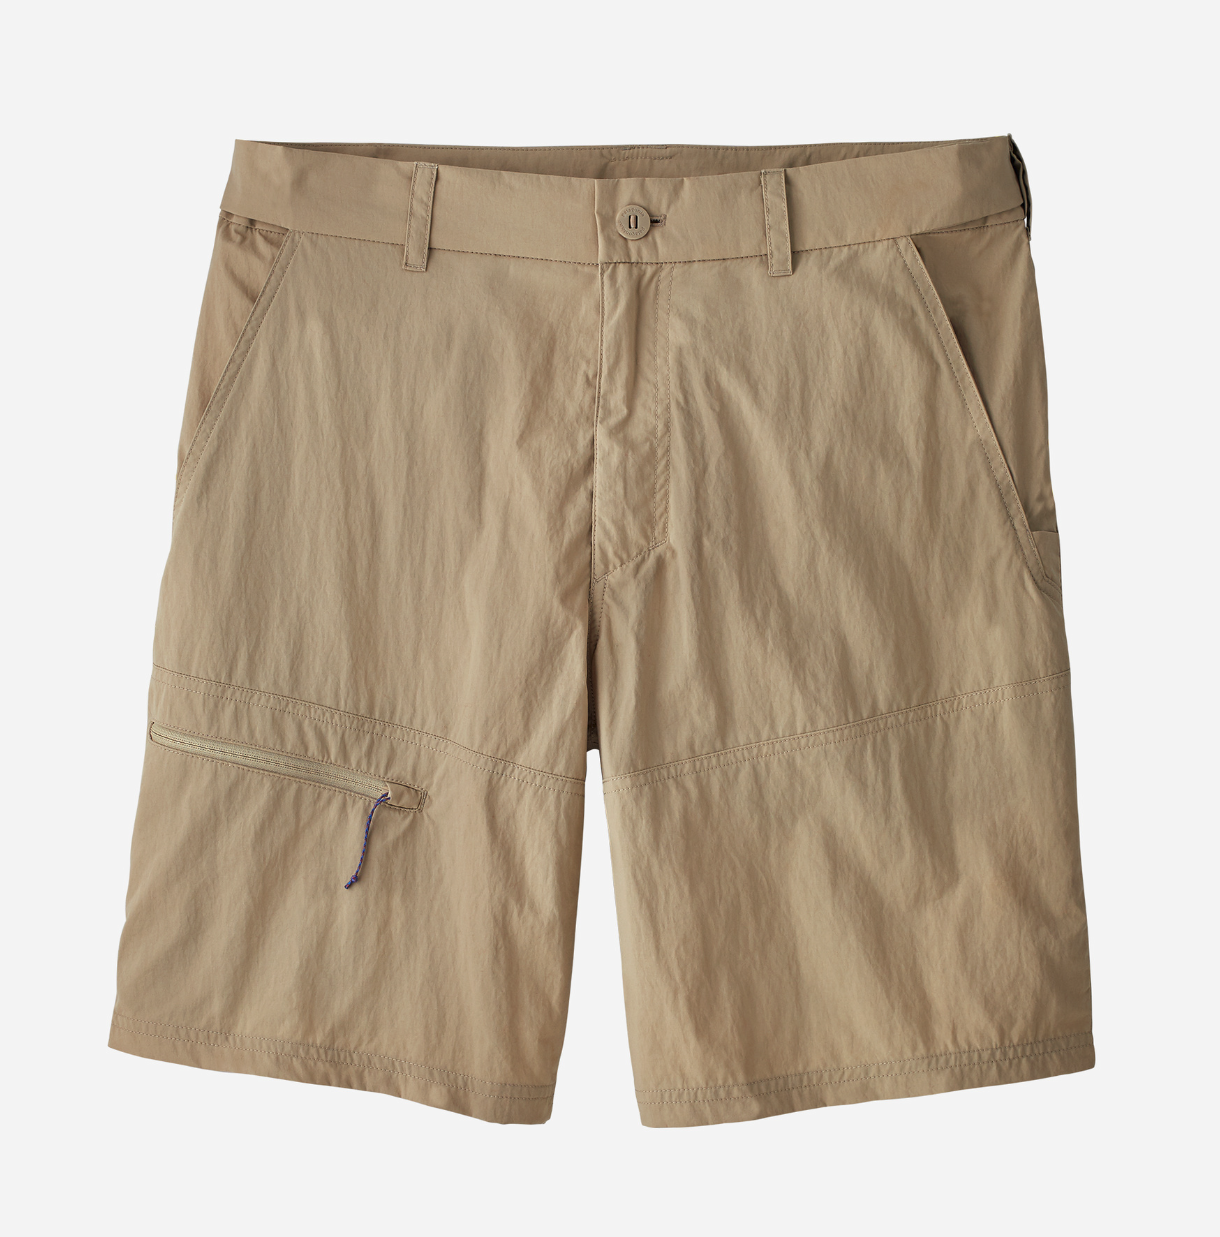 Patagonia Sandy Cay Shorts, Best Fly Fishing Shorts, Buy Patagonia Fishing  Shorts